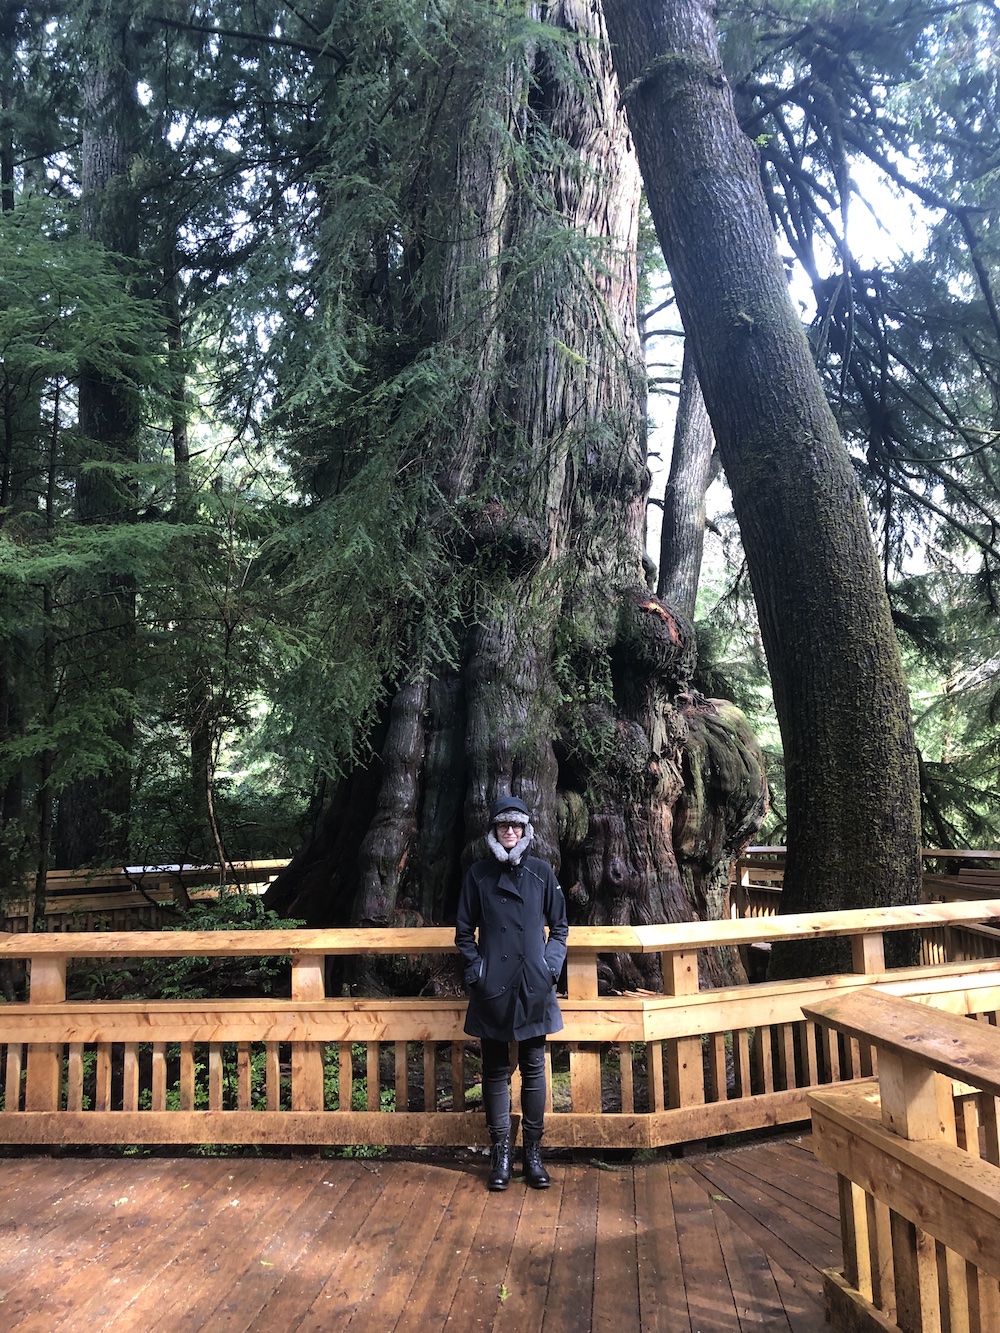 Myself standing in front of a large Sequoia.